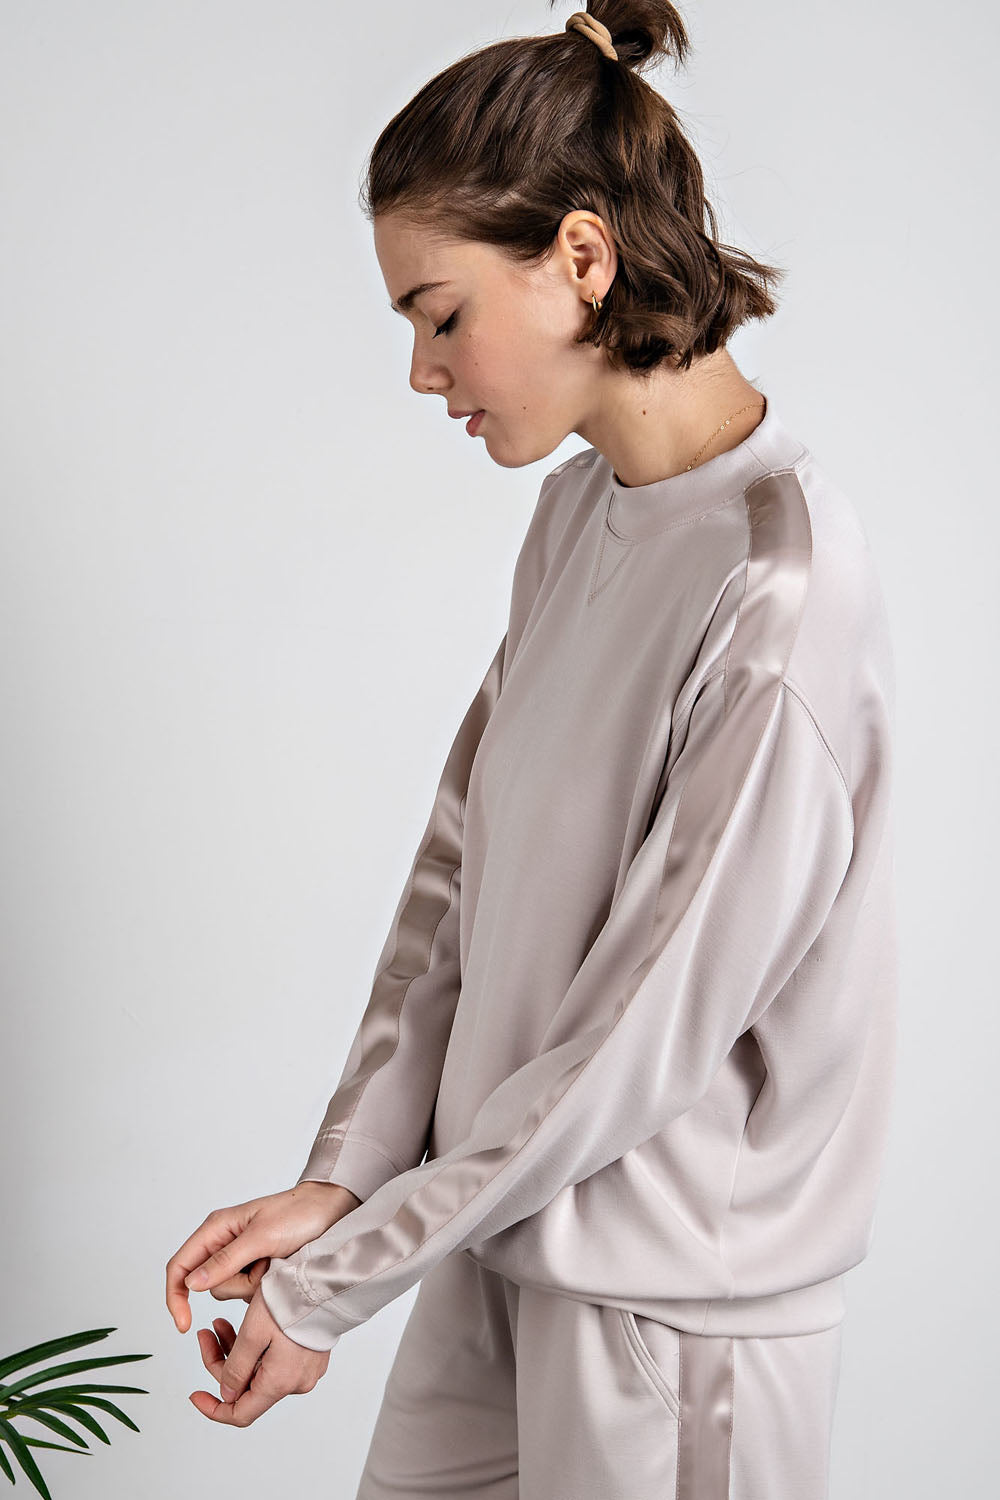 0142837_modal-poly-span-top-with-satin-side-detail.jpeg